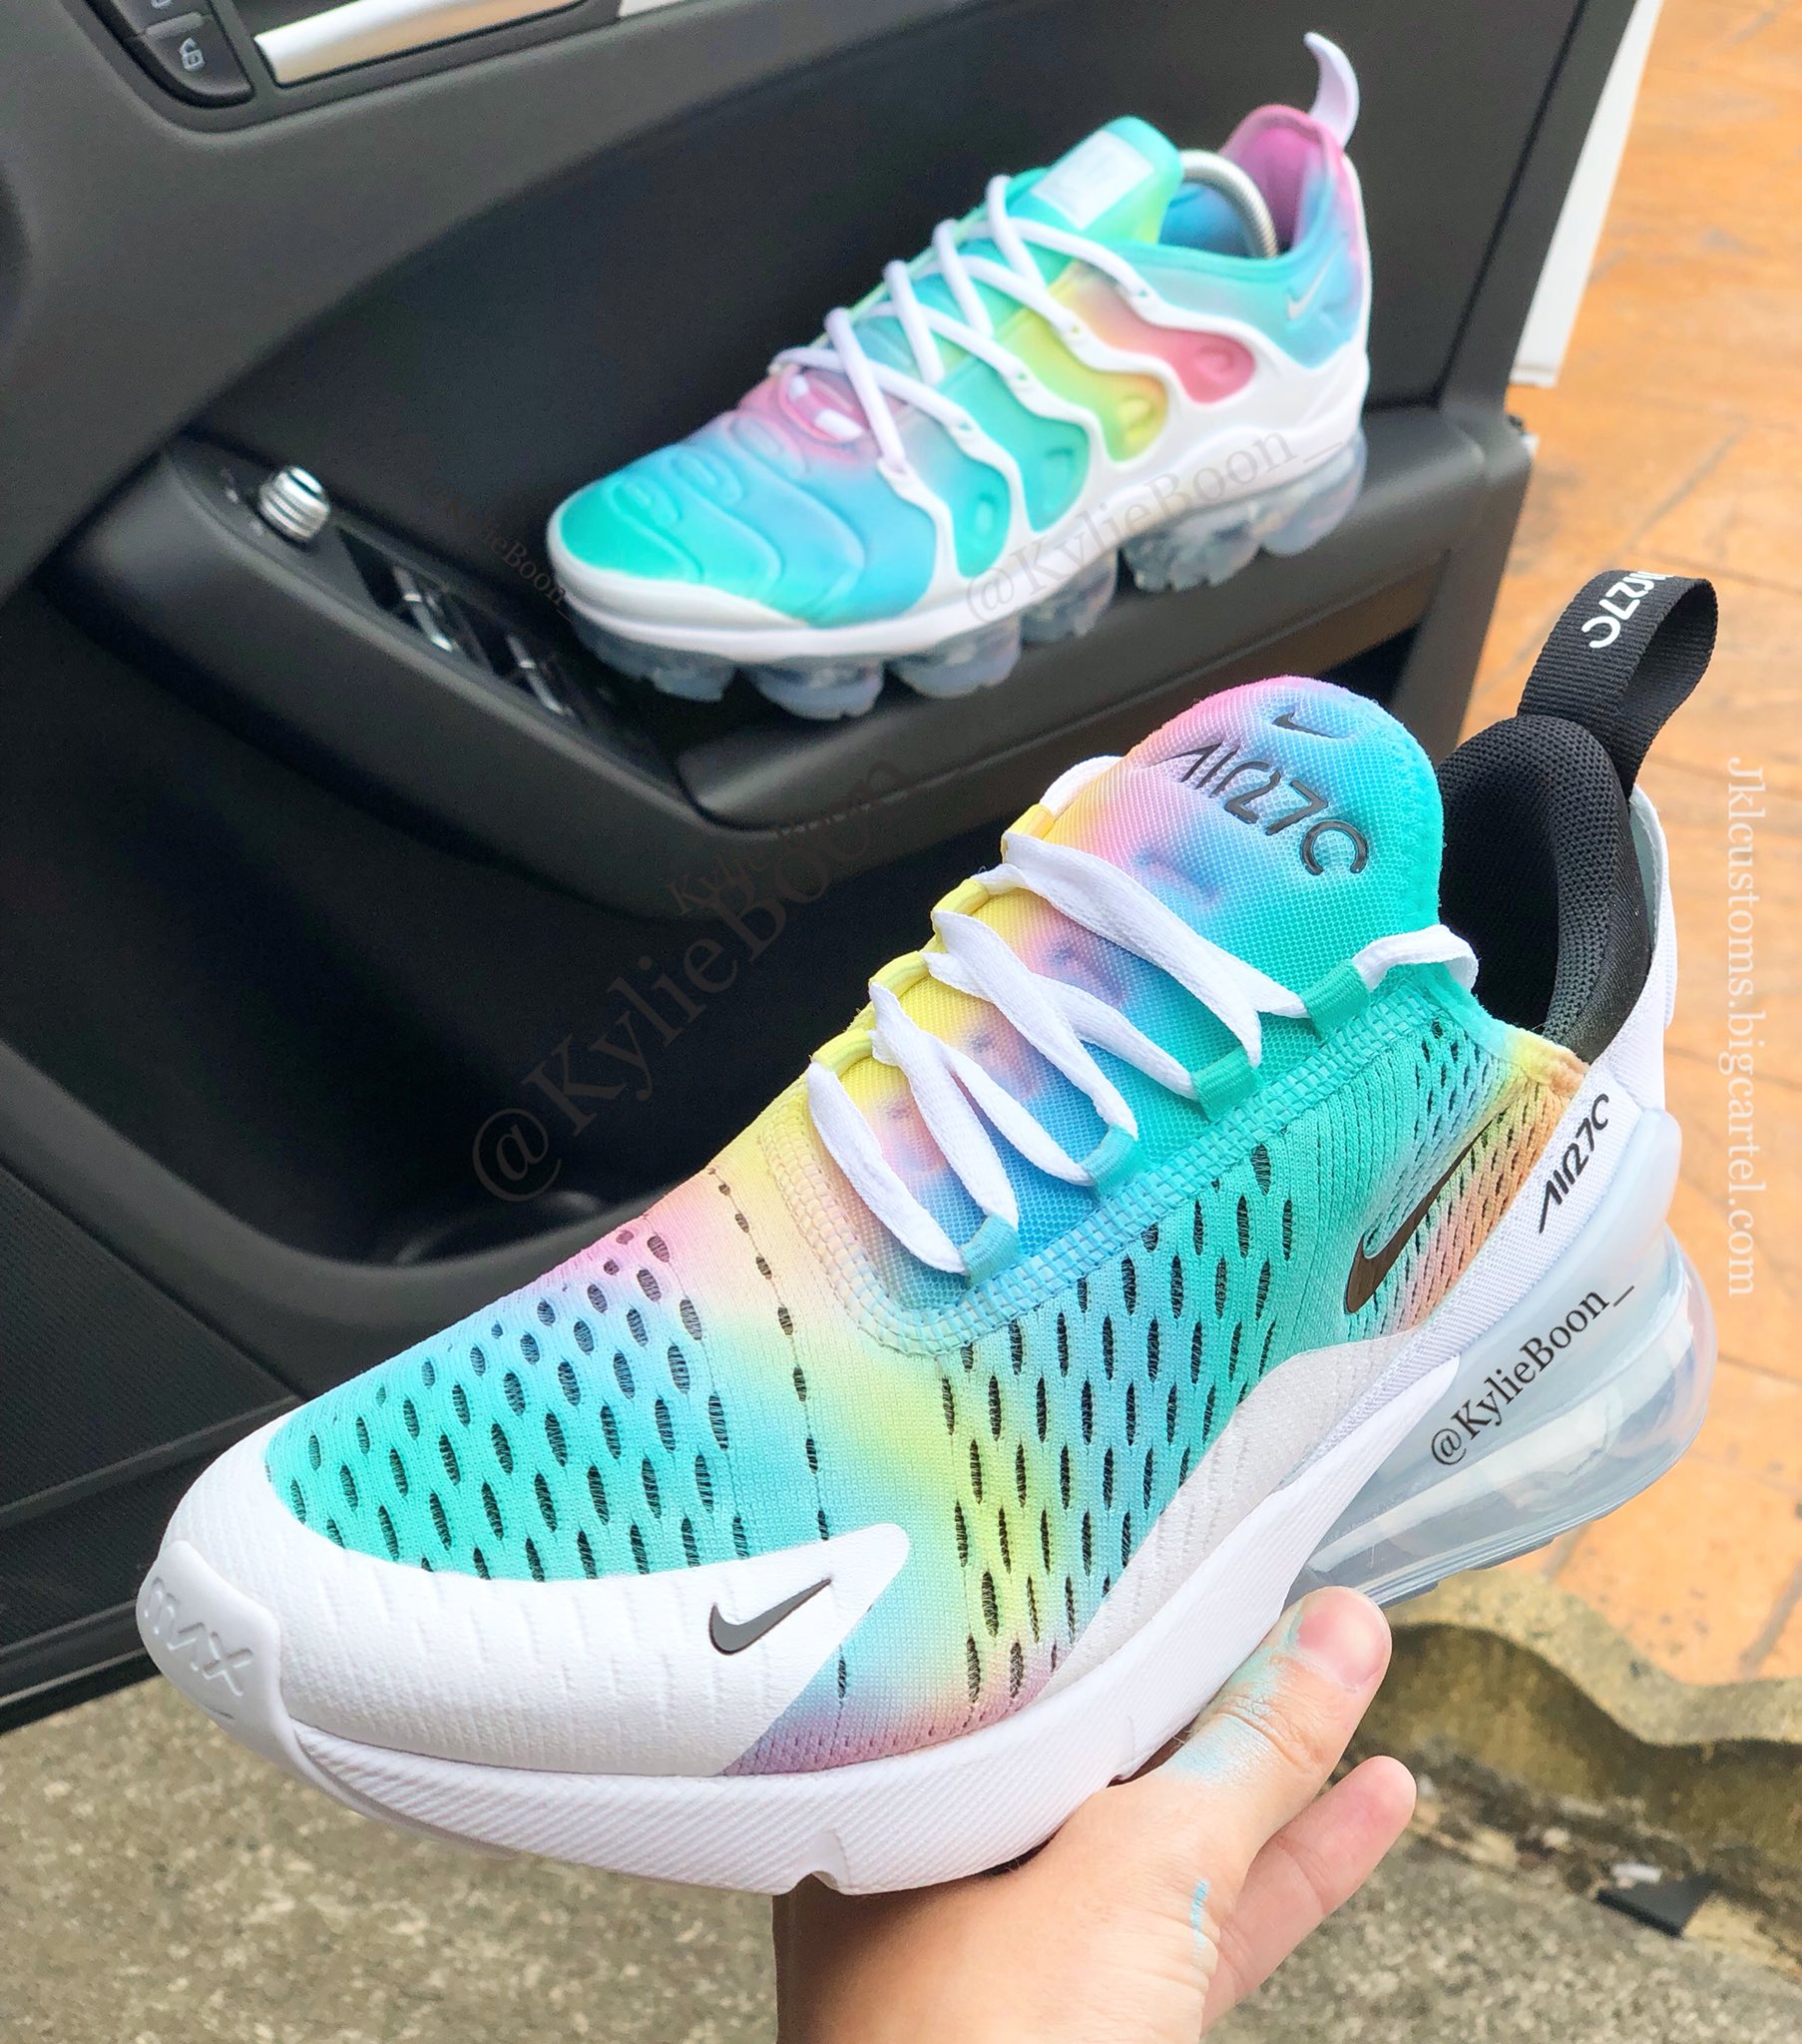 Atlético mendigo Ir a caminar Kylie Boon Art on Twitter: "Which do you prefer? @SneakGallery #air270  #airmax270 https://t.co/ciamZrXP3v" / Twitter